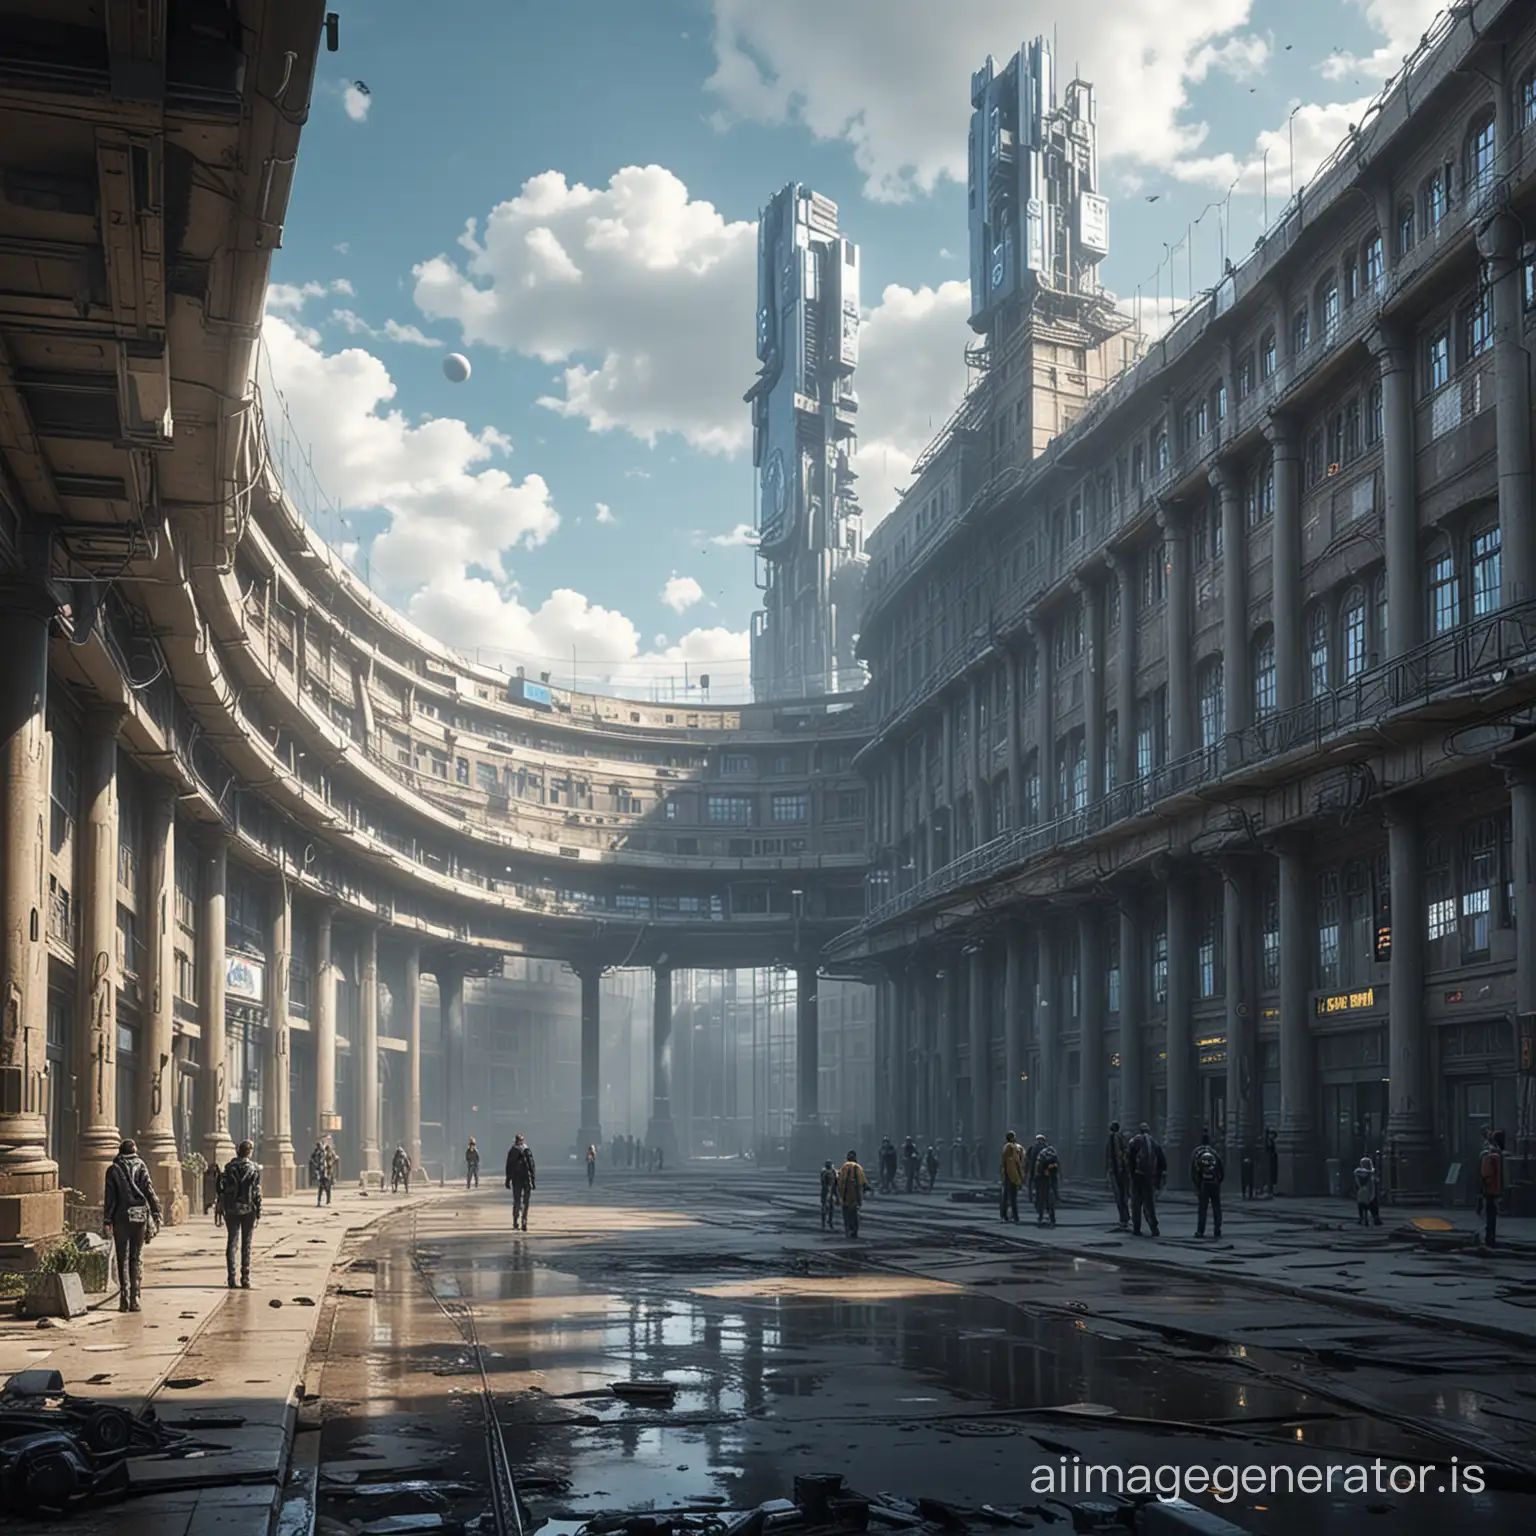 2100-Year-Saint-Petersburg-HighTech-School-Cyberpunk-Concept-with-Photorealistic-and-Technological-Elements